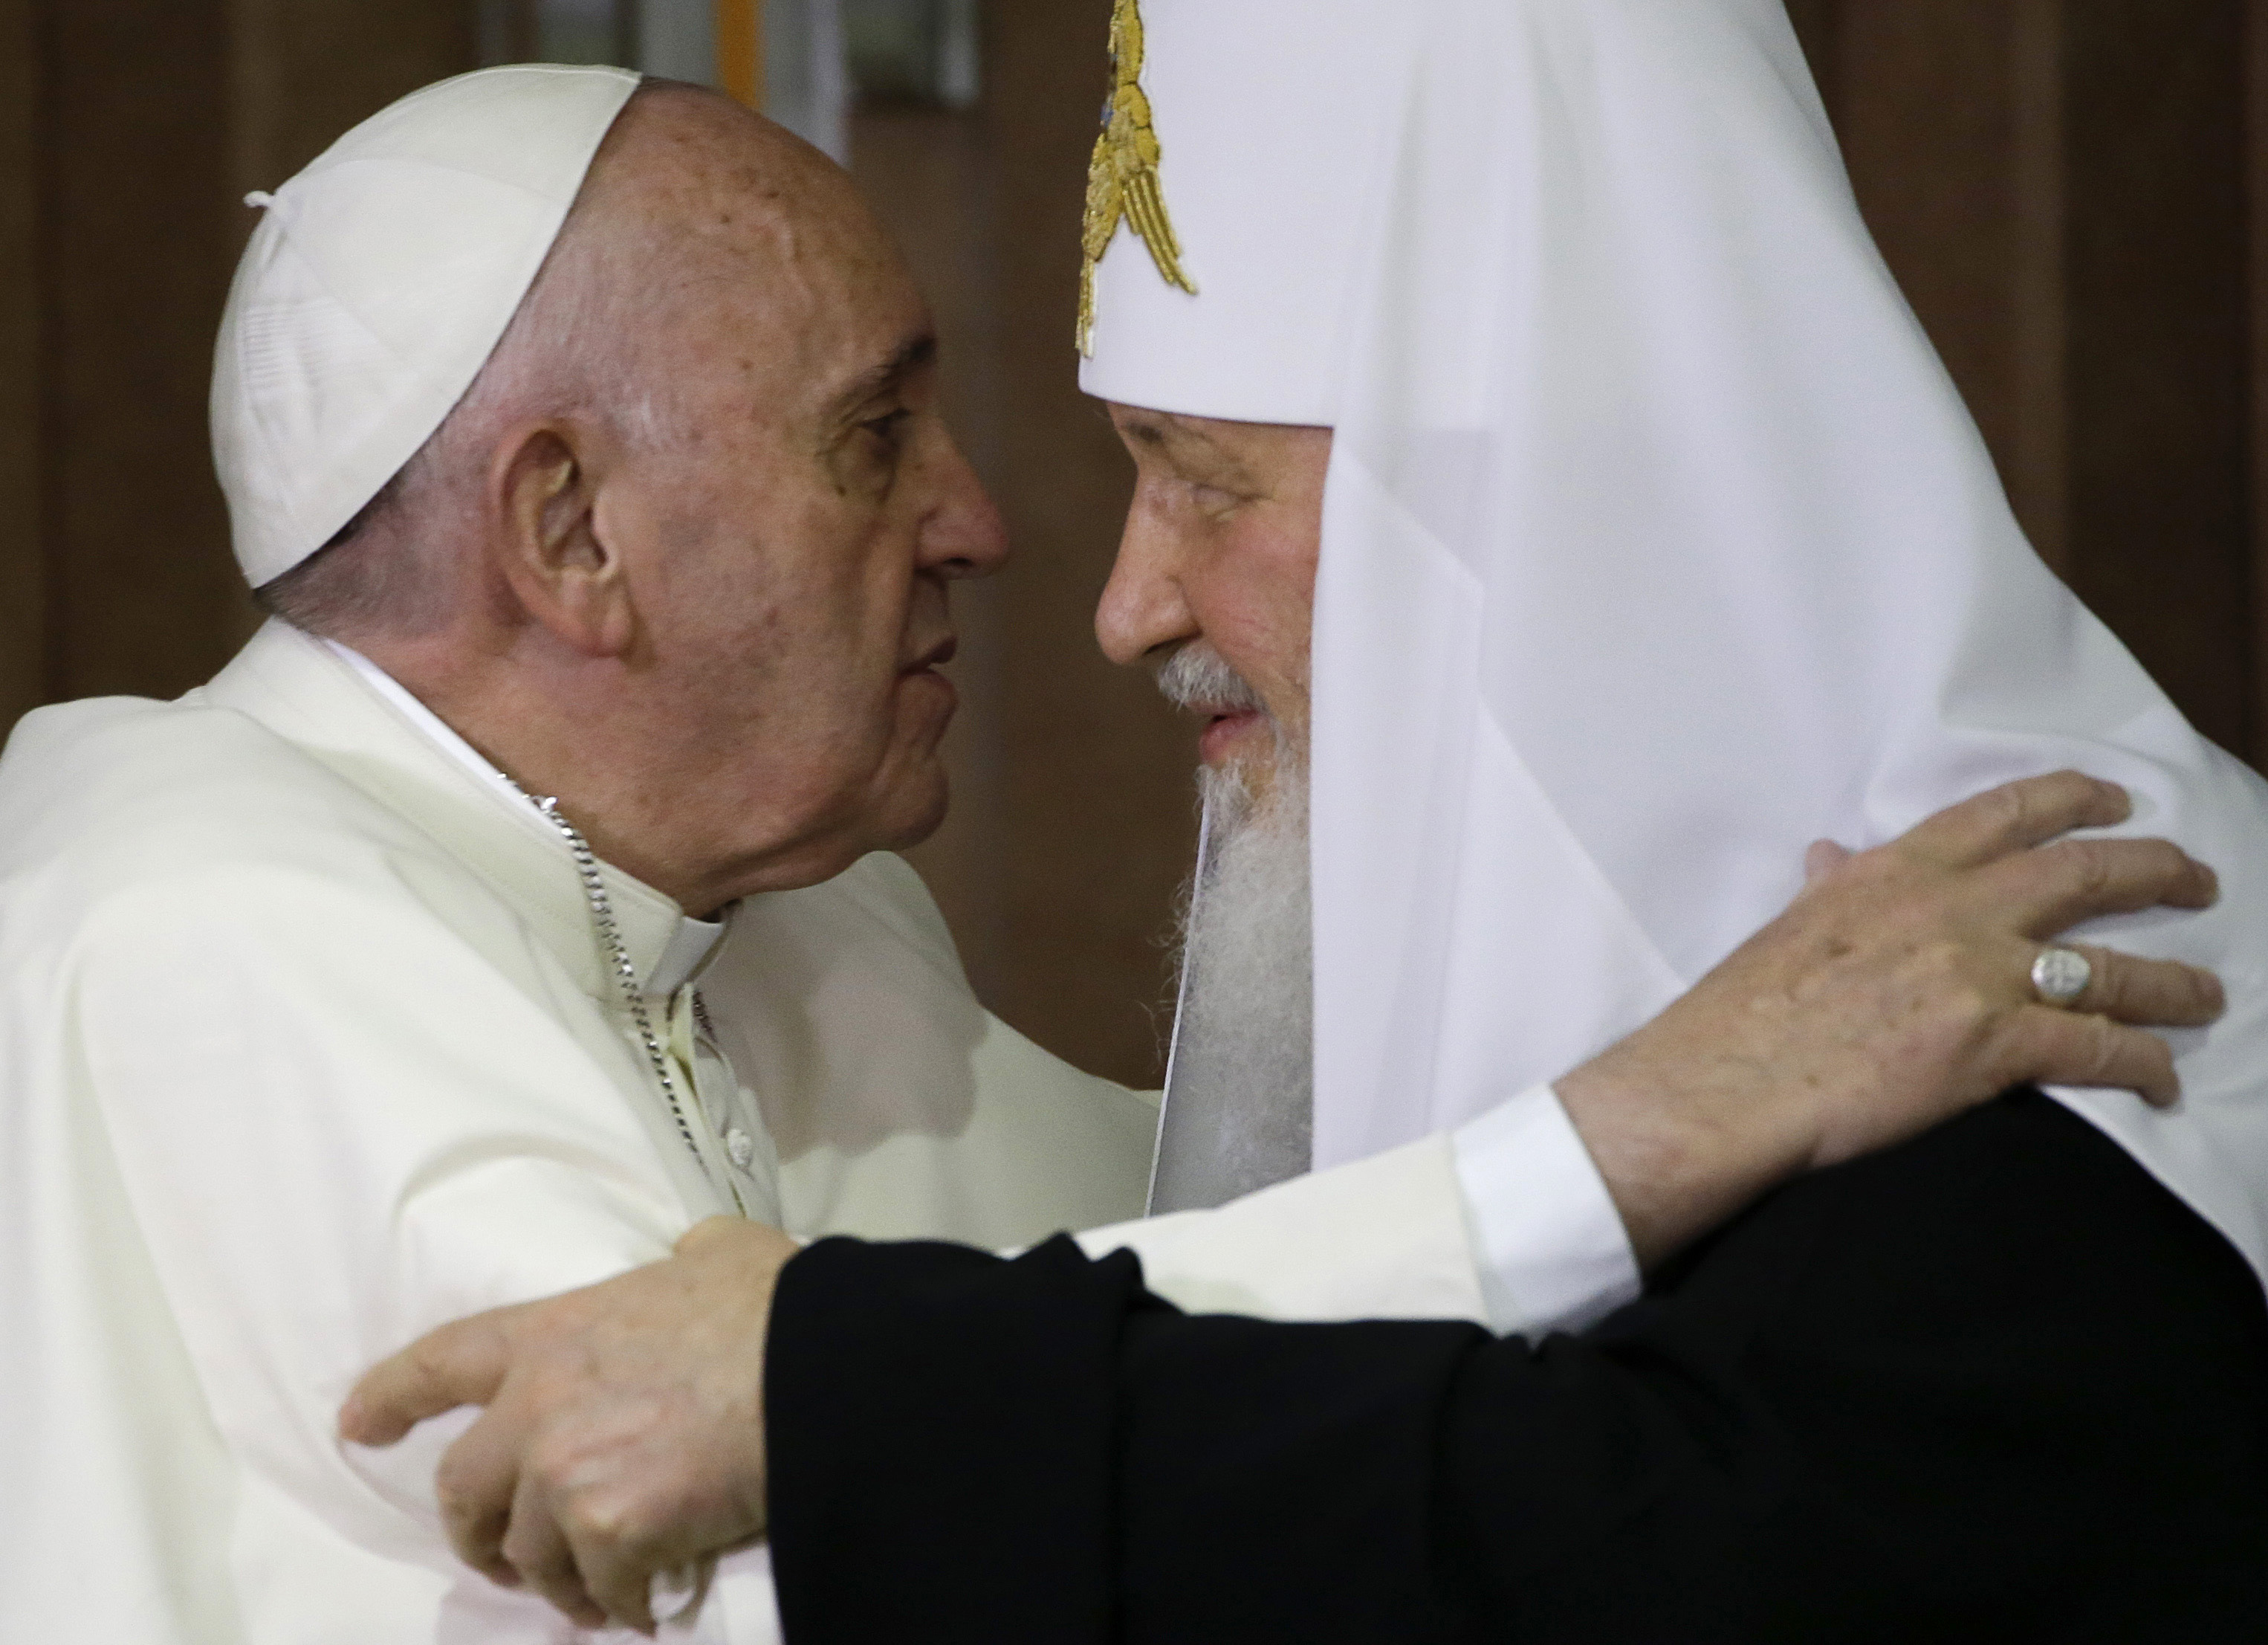 Pope Francis, left, embraces Russian Orthodox Patriarch Kirill, head of the Russian Orthodox Church, after signing a joint declaration on religious unity in Havana, Cuba on Feb. 12, 2016. (AP/Gregorio Borgia)